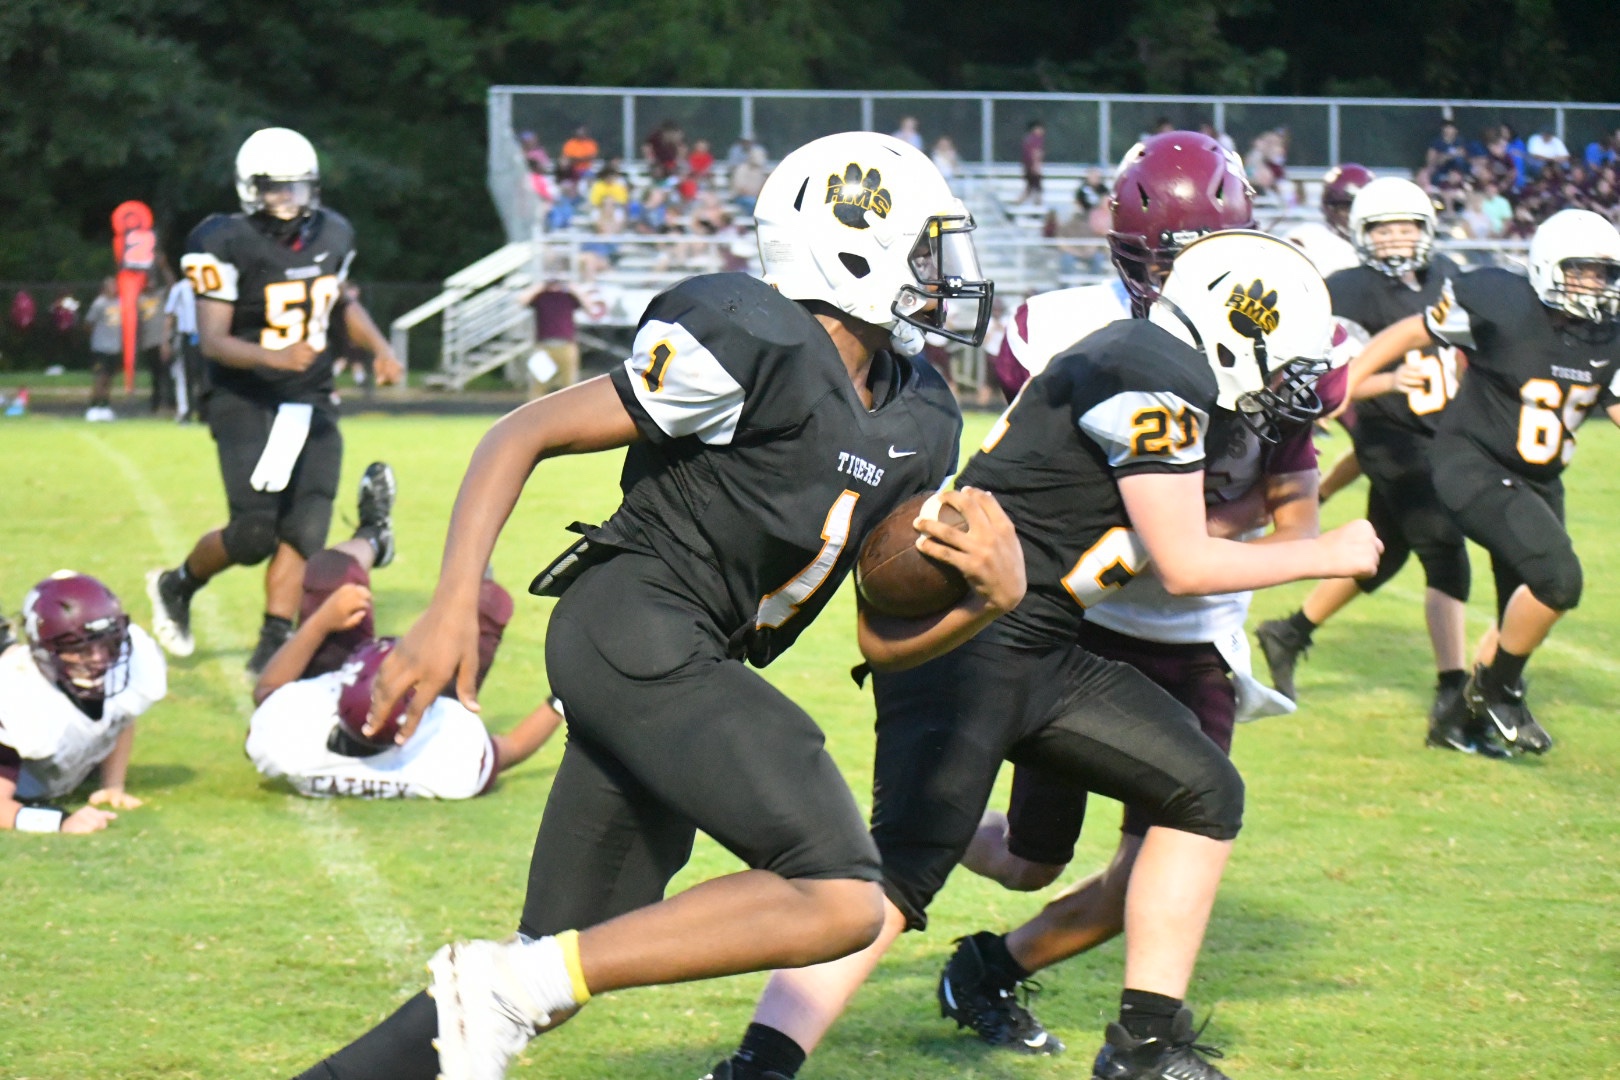 RMS middle school sweeps New Albany, JV gets TD to tie as time expires